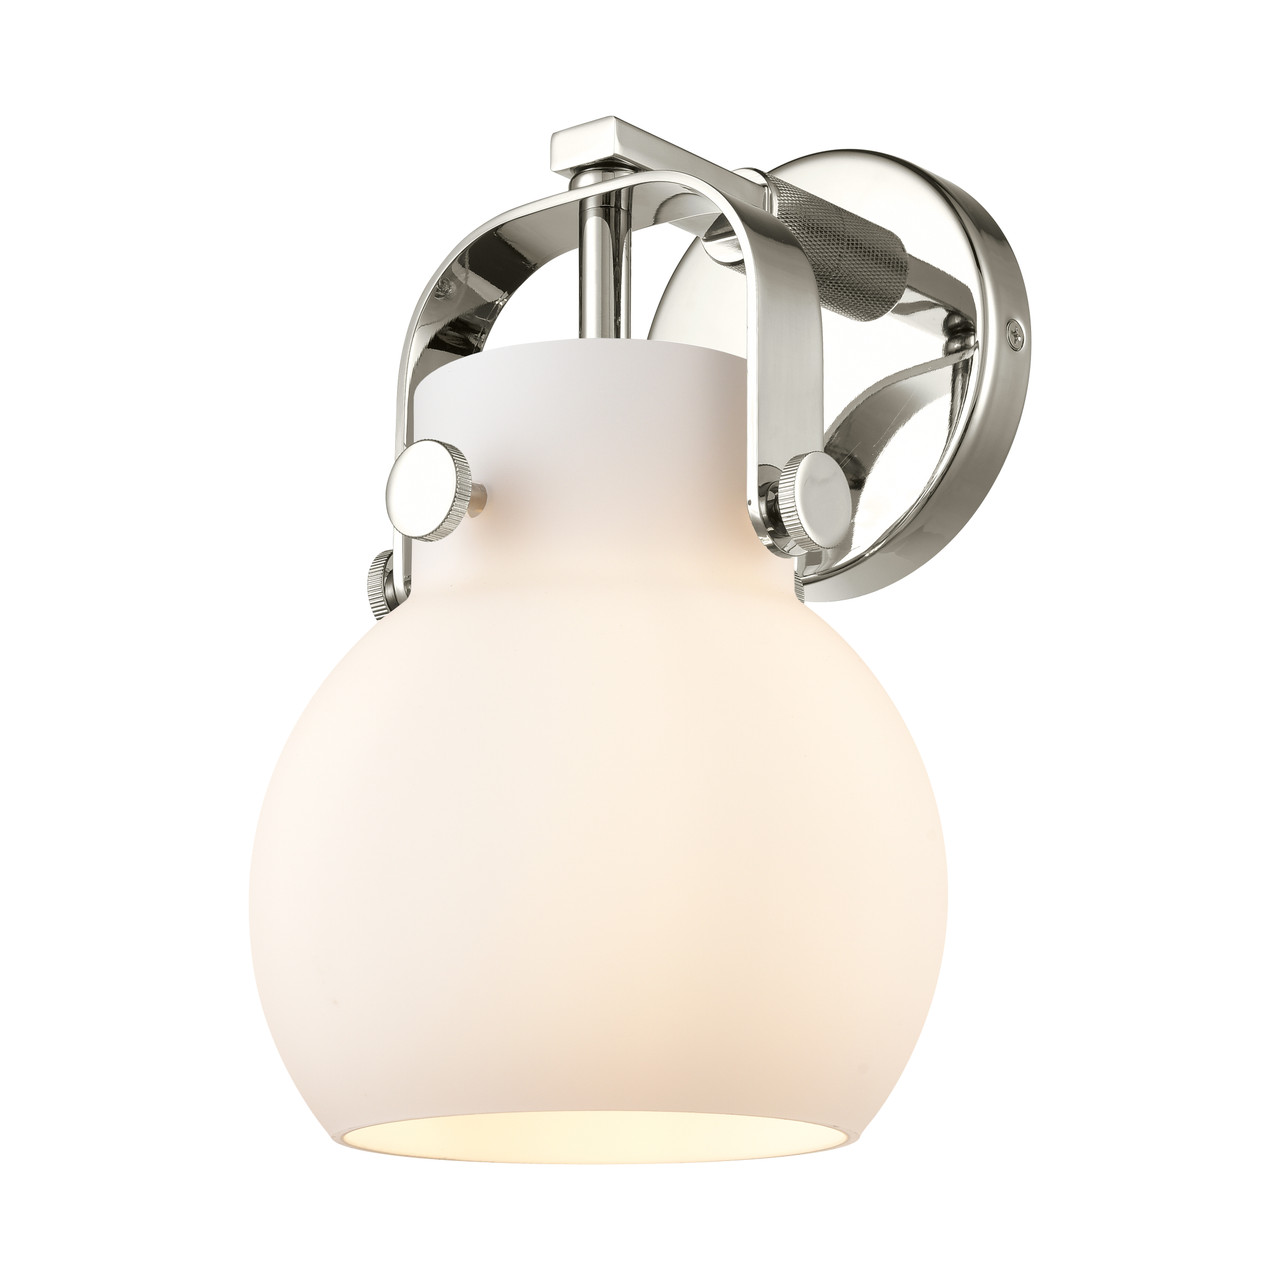 INNOVATIONS 423-1W-PN-G410-6WH Pilaster II Sphere 1 6.5 inch Sconce Polished Nickel